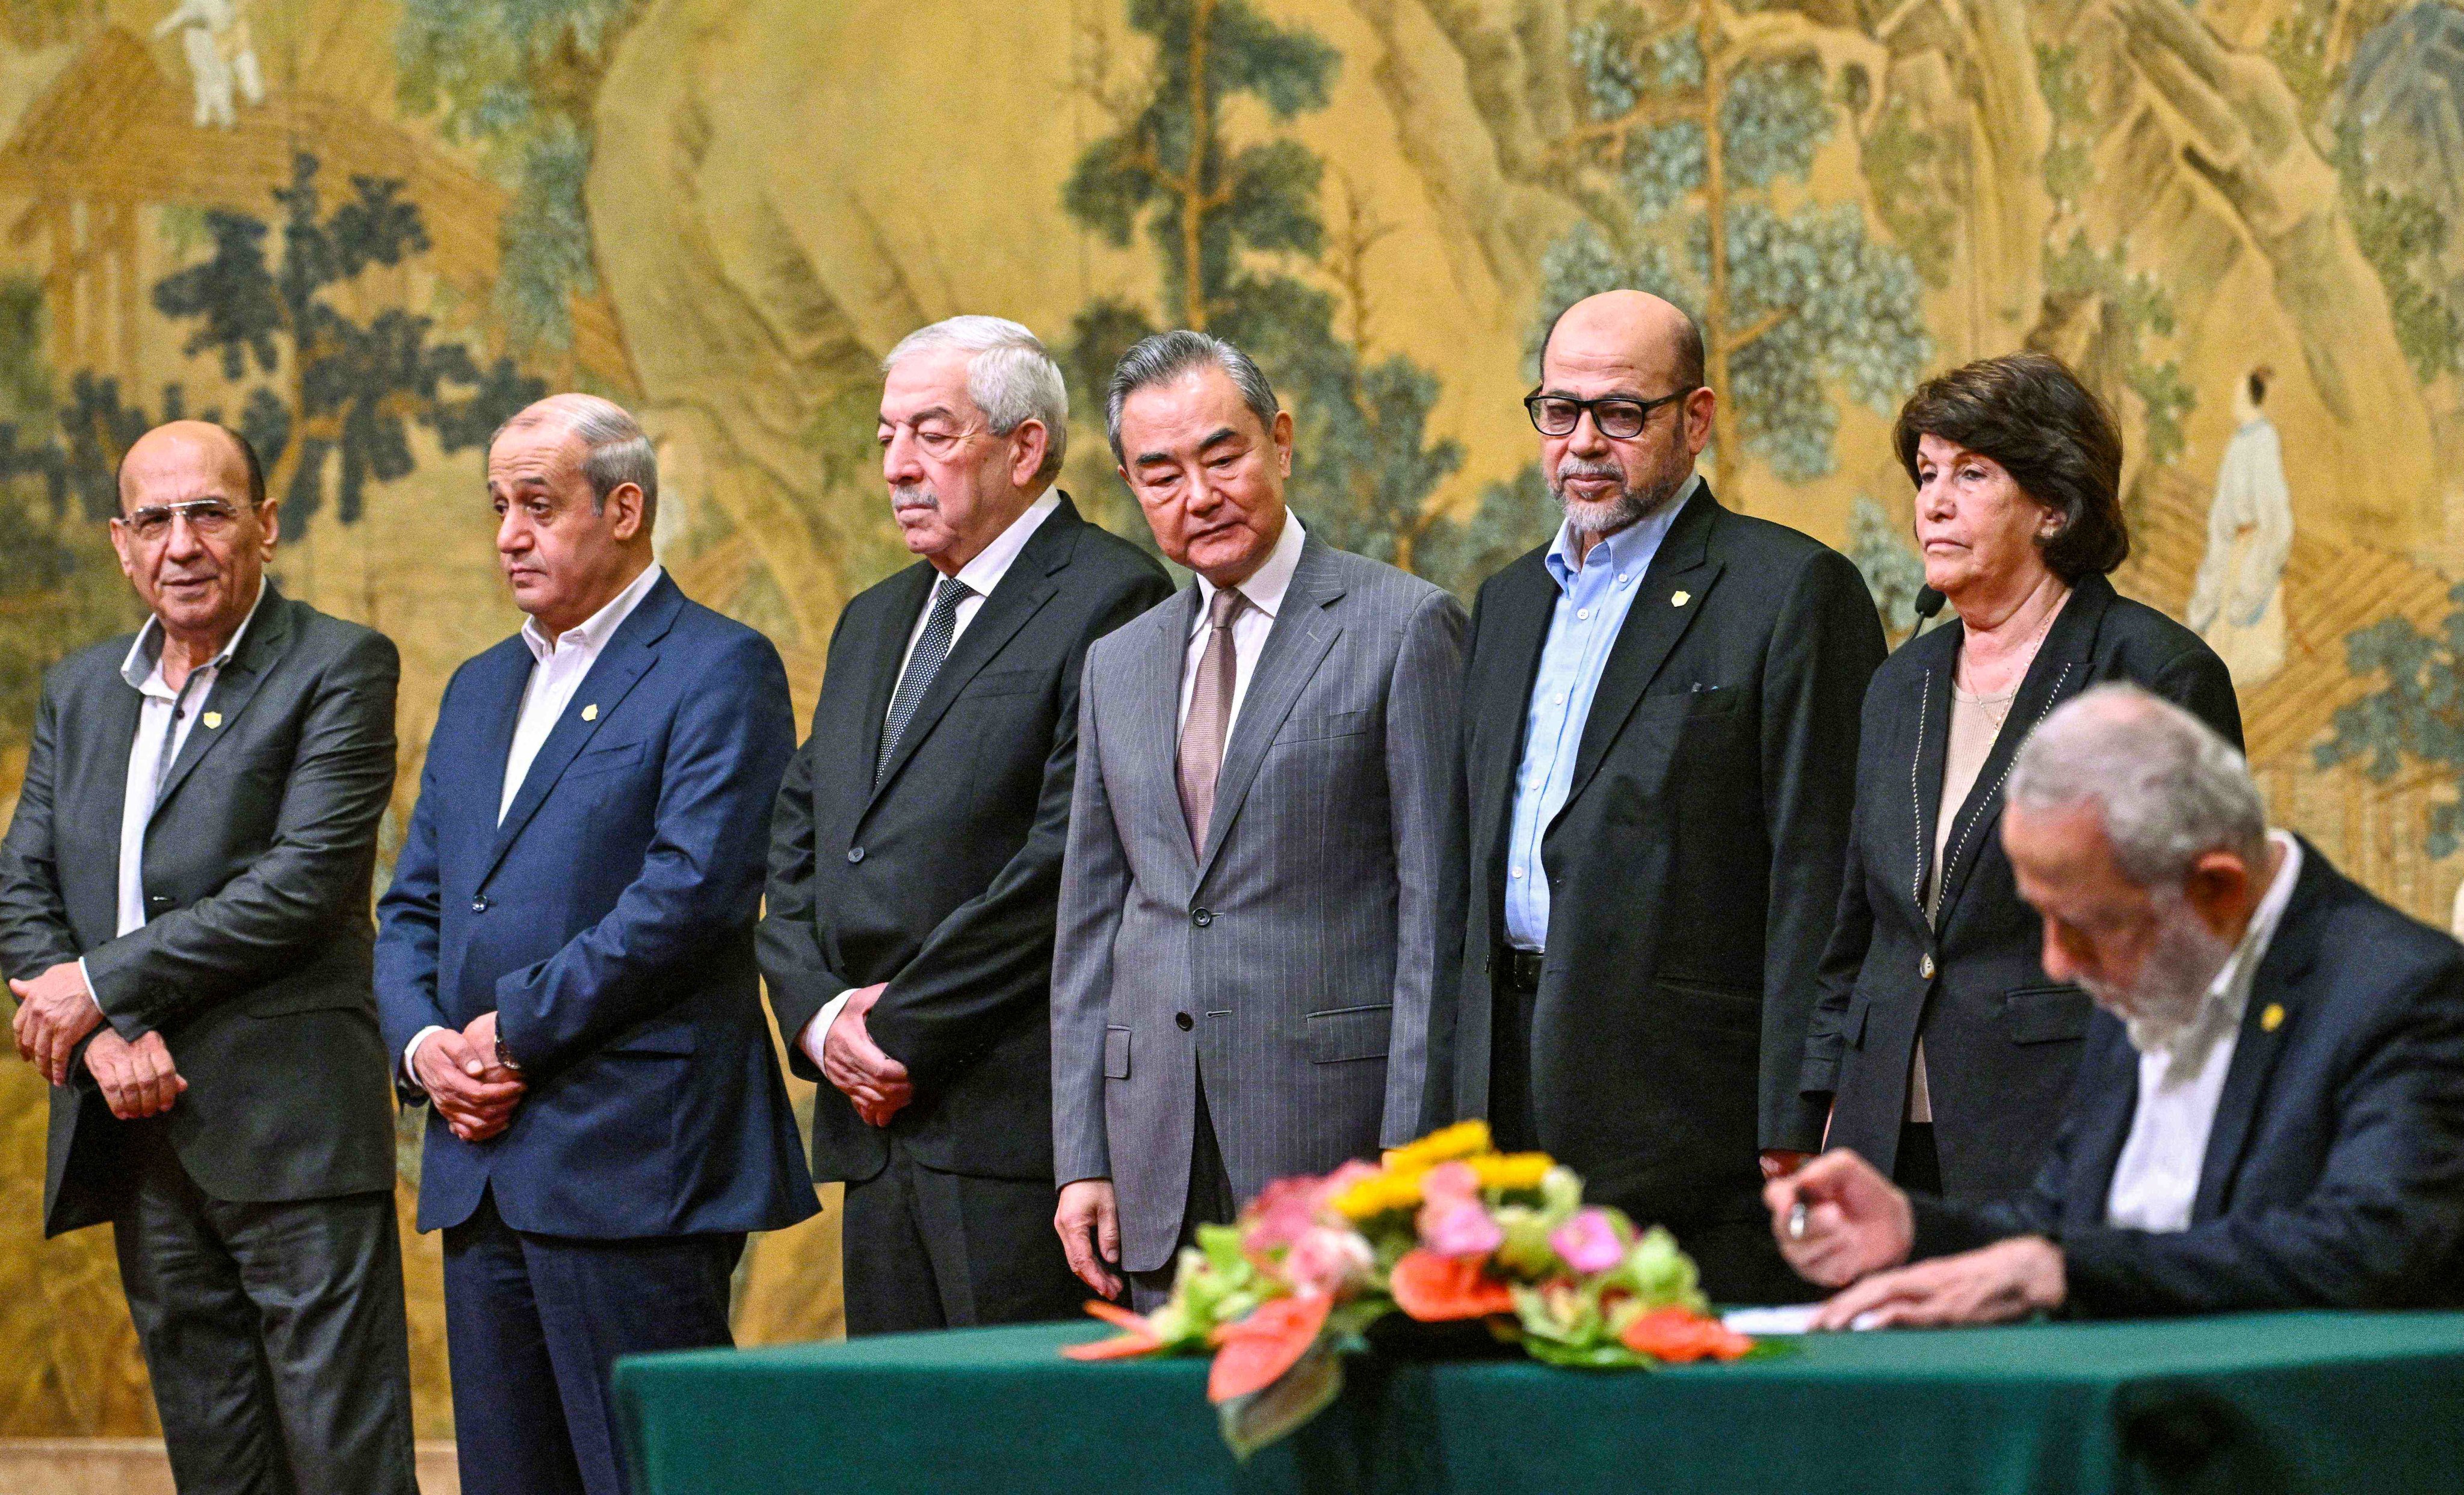 China’s Foreign Minister Wang Yi looks on during the signing of the “Beijing declaration” at the Diaoyutai State Guesthouse. Photo: AFP